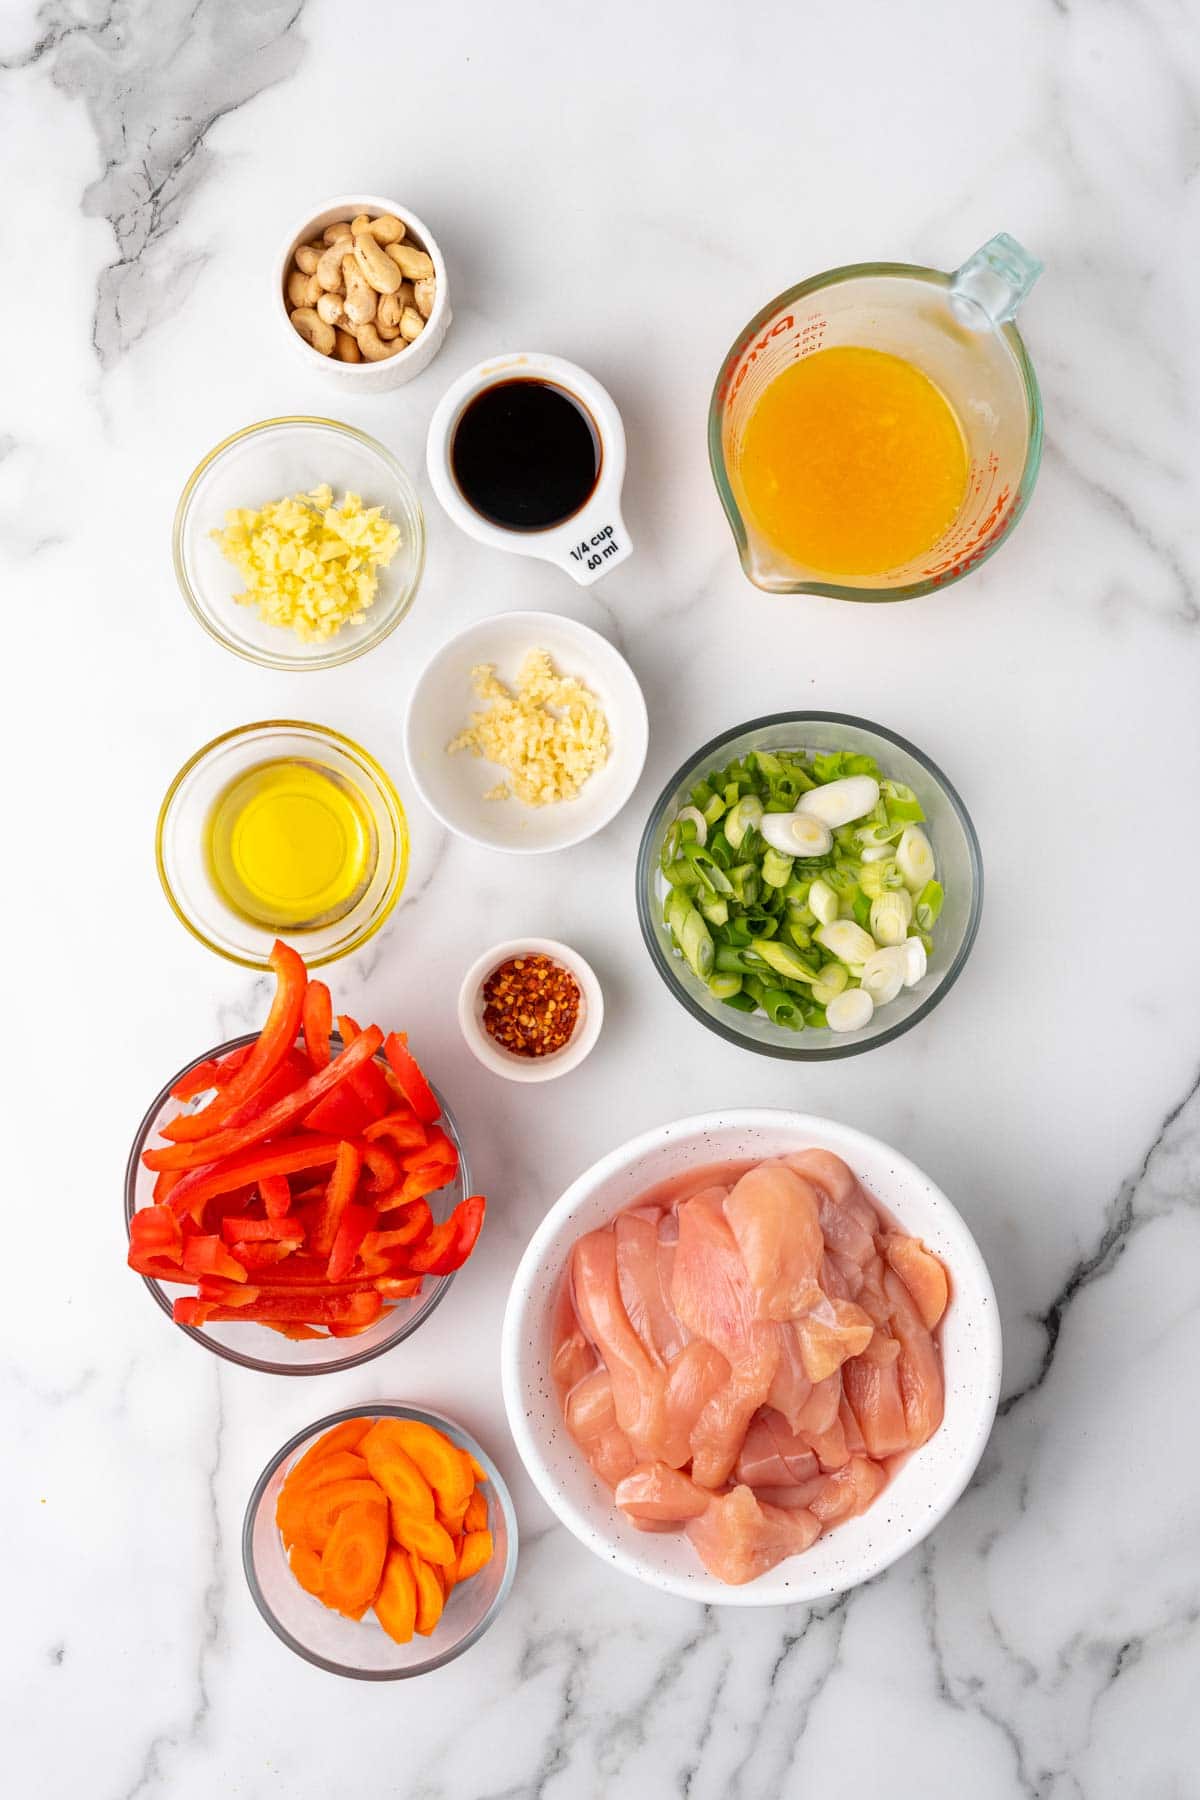 Ingredients for the stir-fry laid out on a table